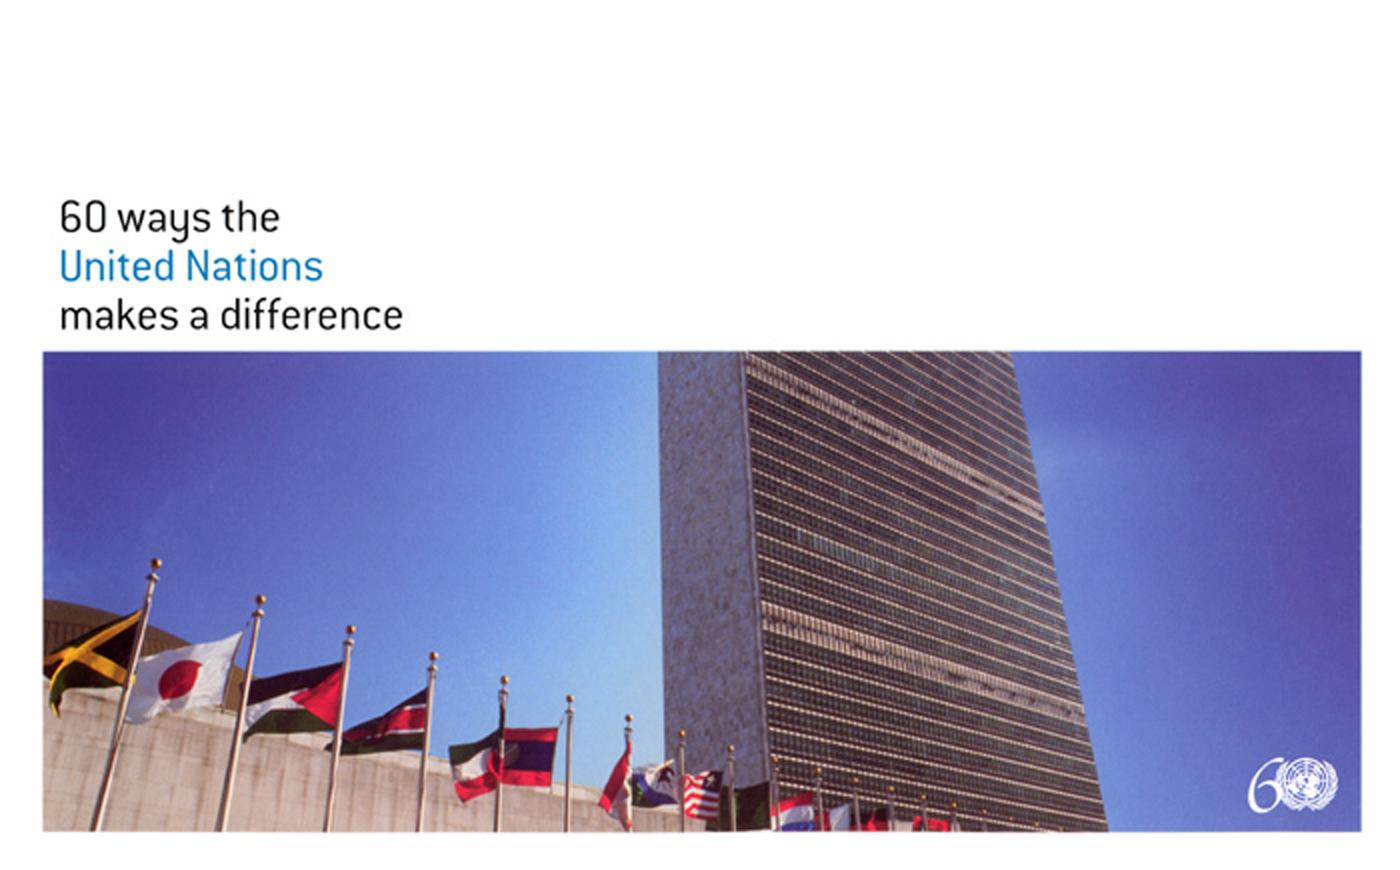 60 Ways the United Nations Makes a Difference